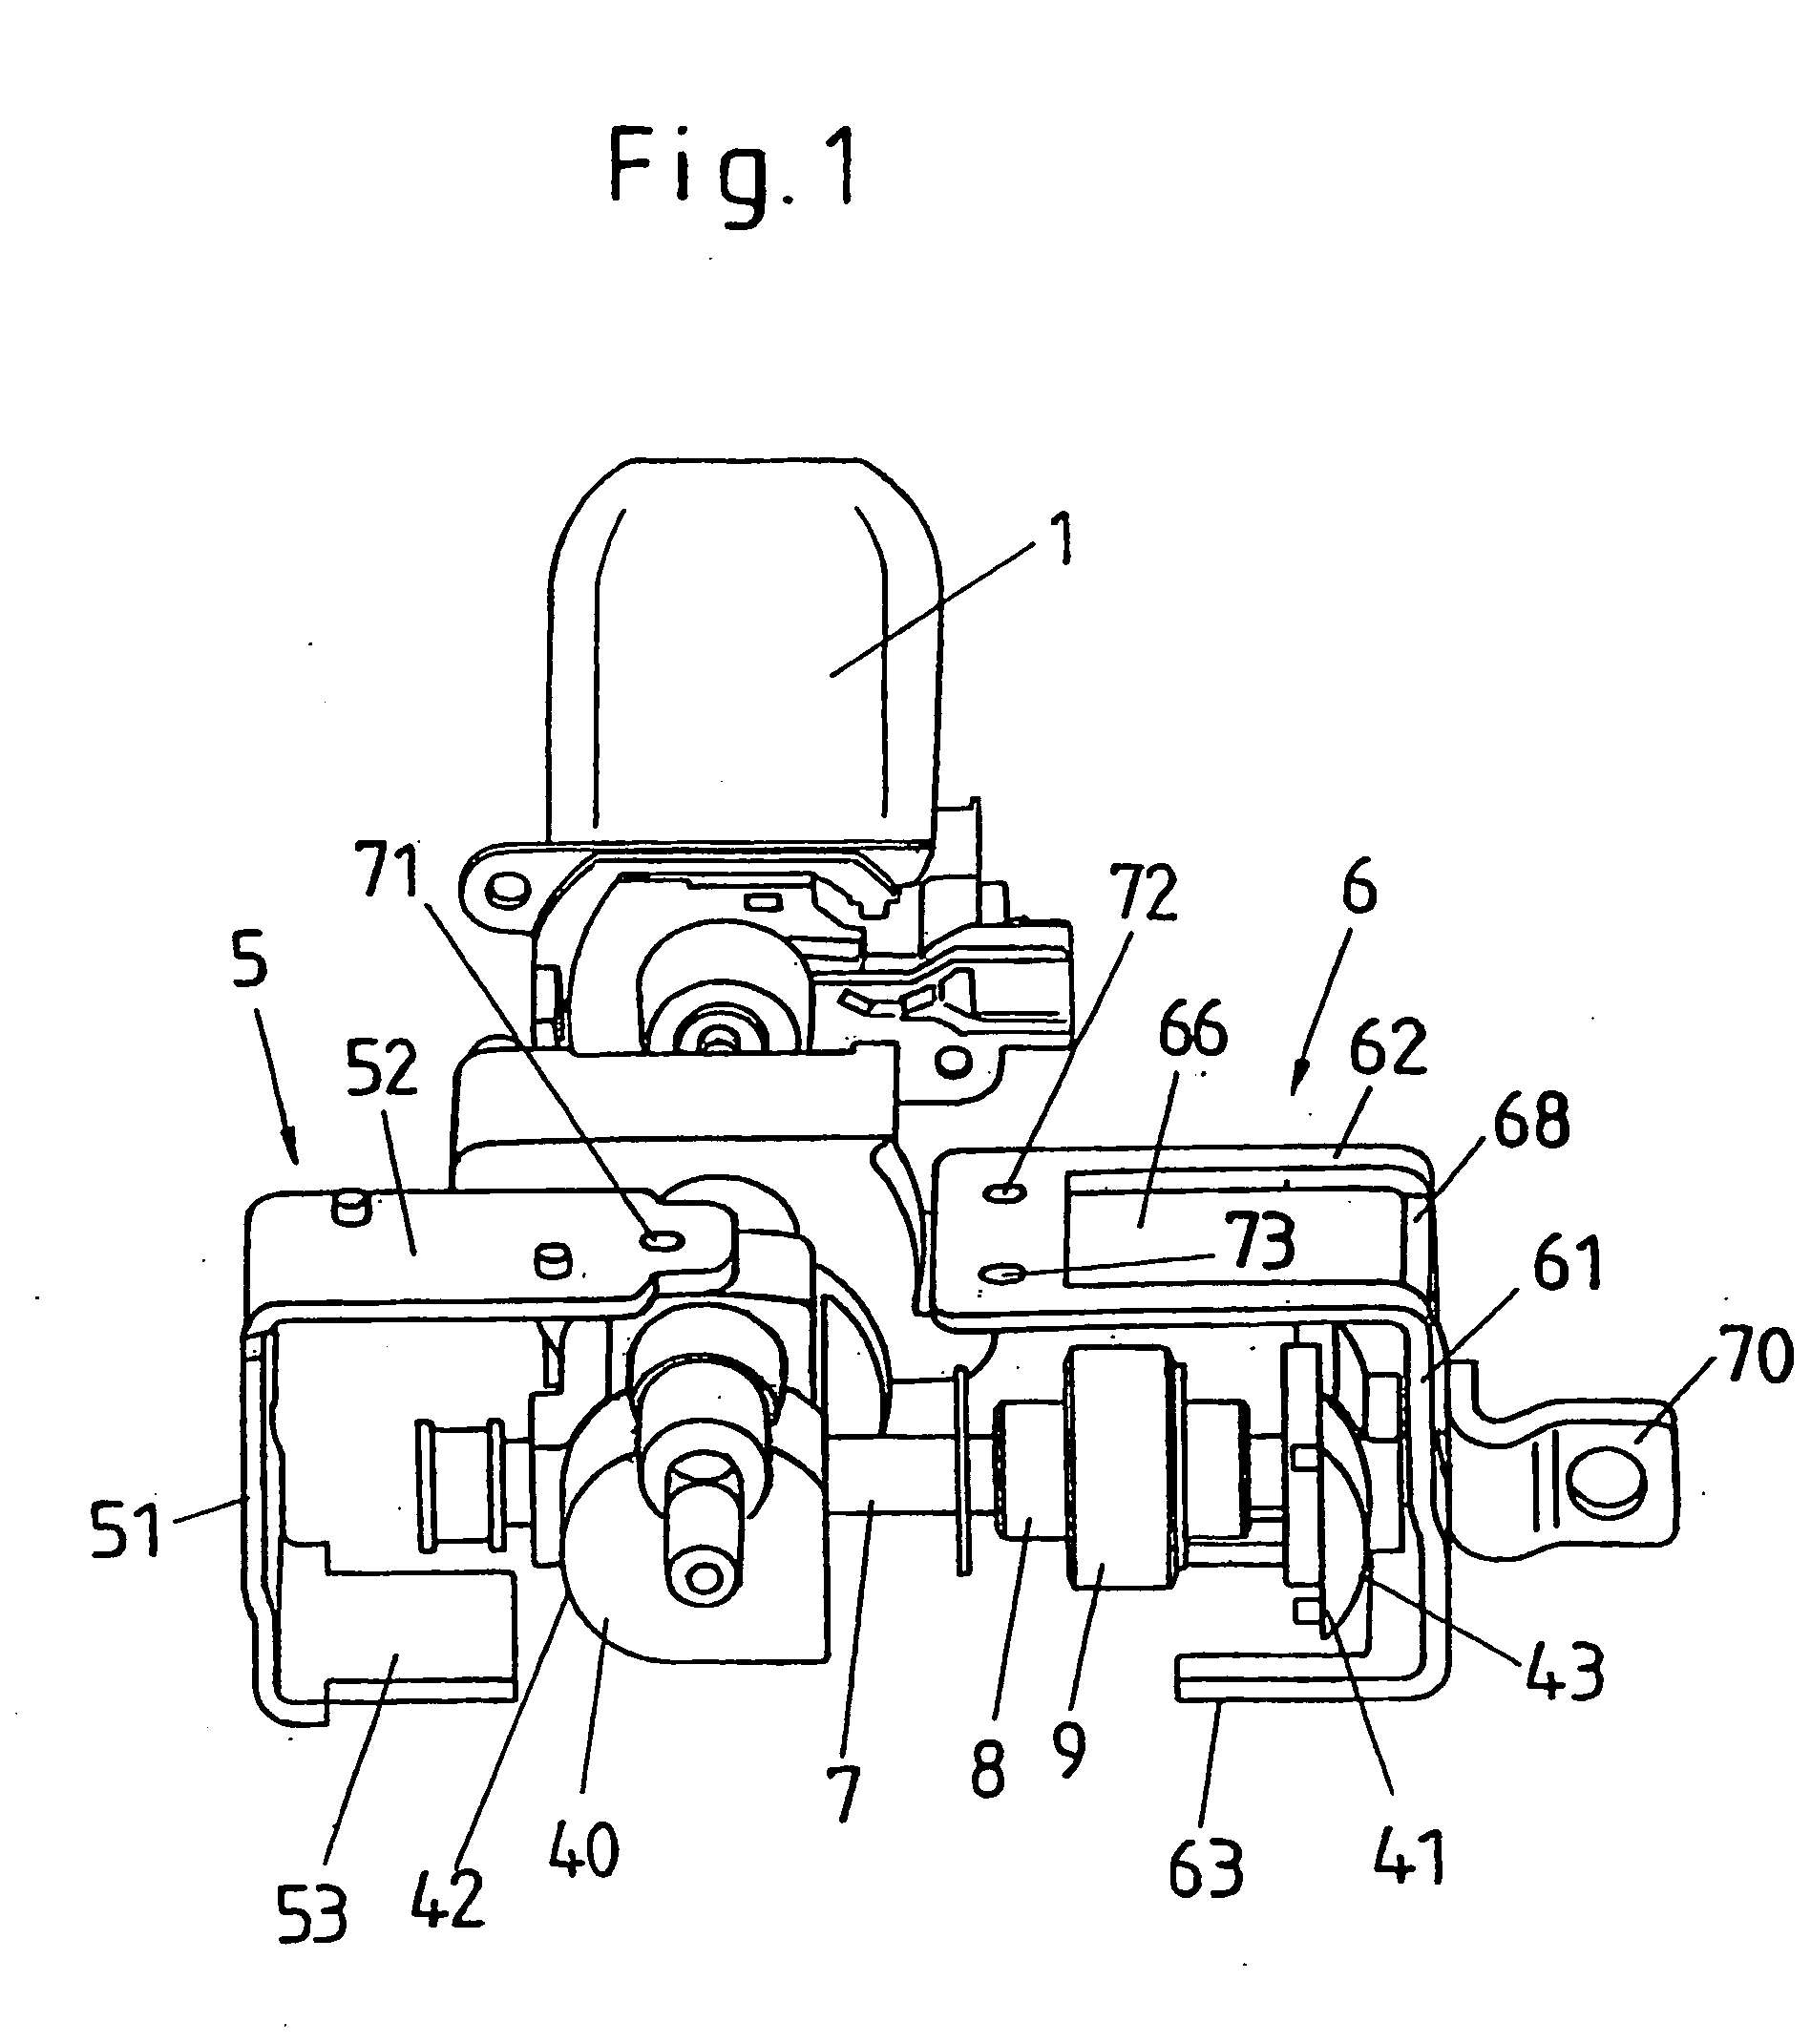 Spindle or worm drive for adjustment devices in motor vehicles